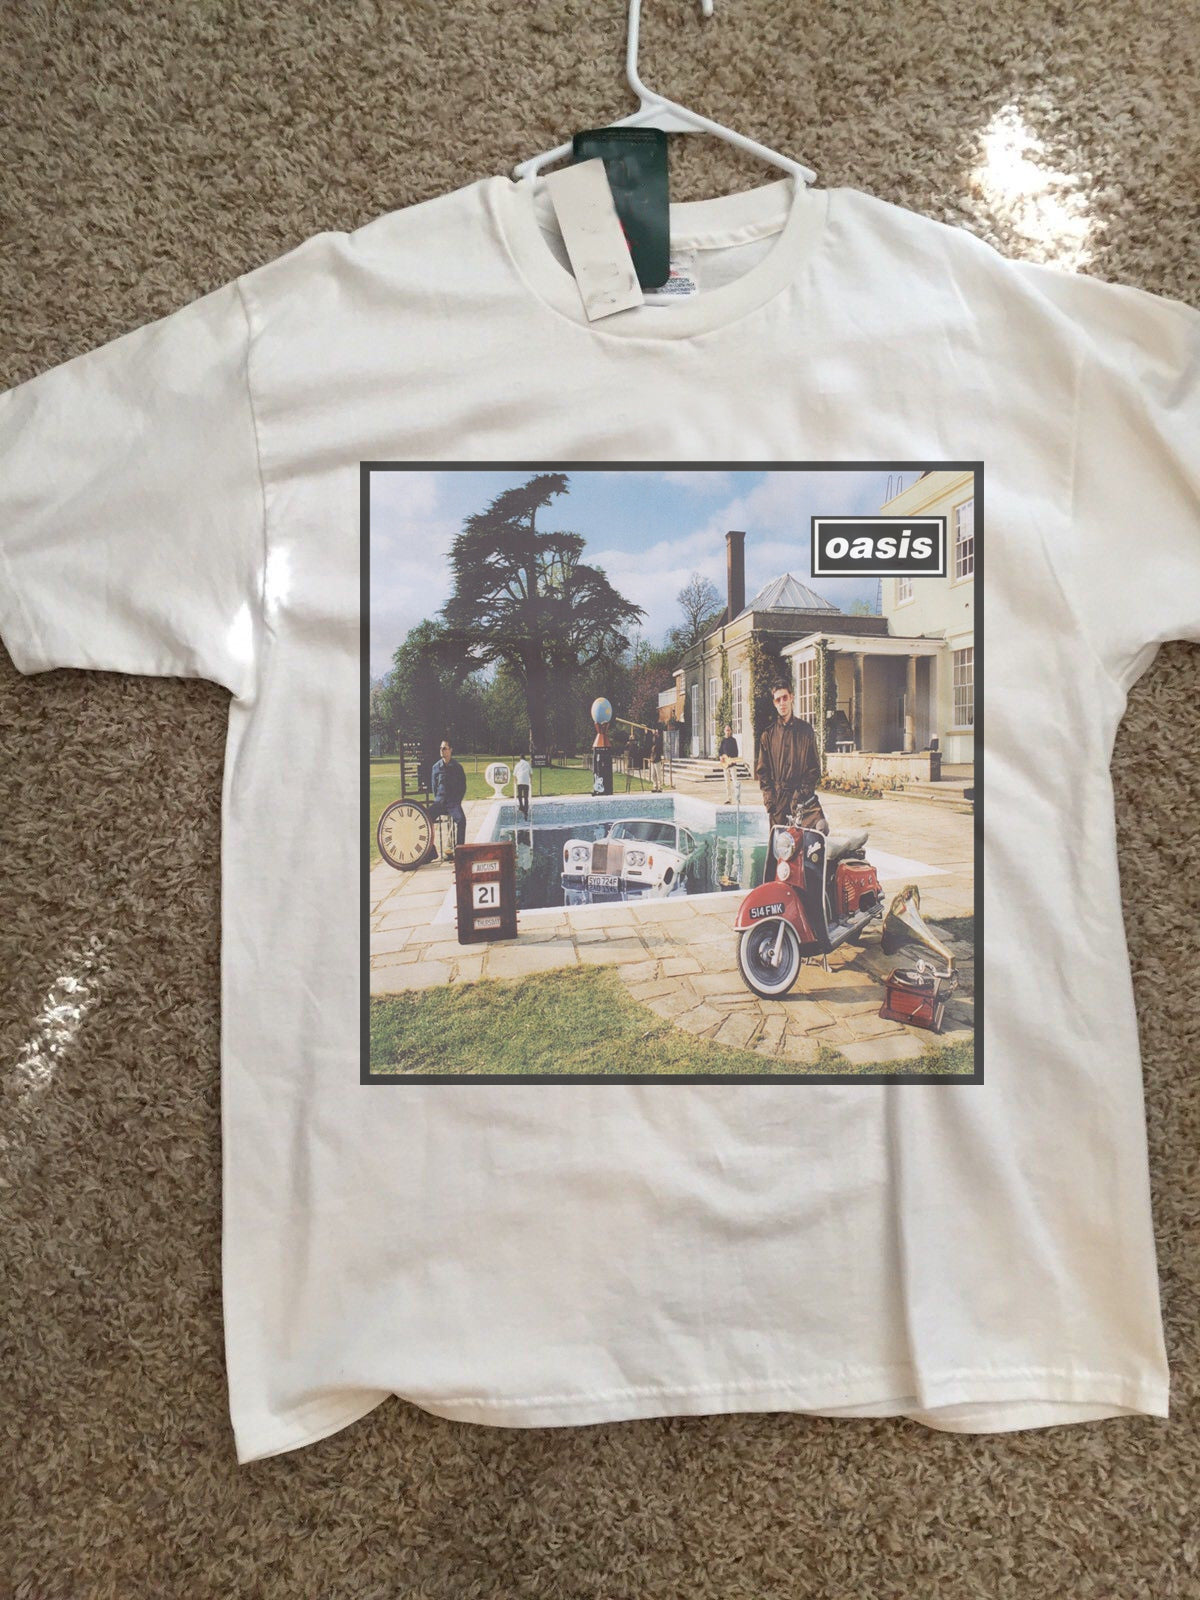 Oasis – House of vintage shirt